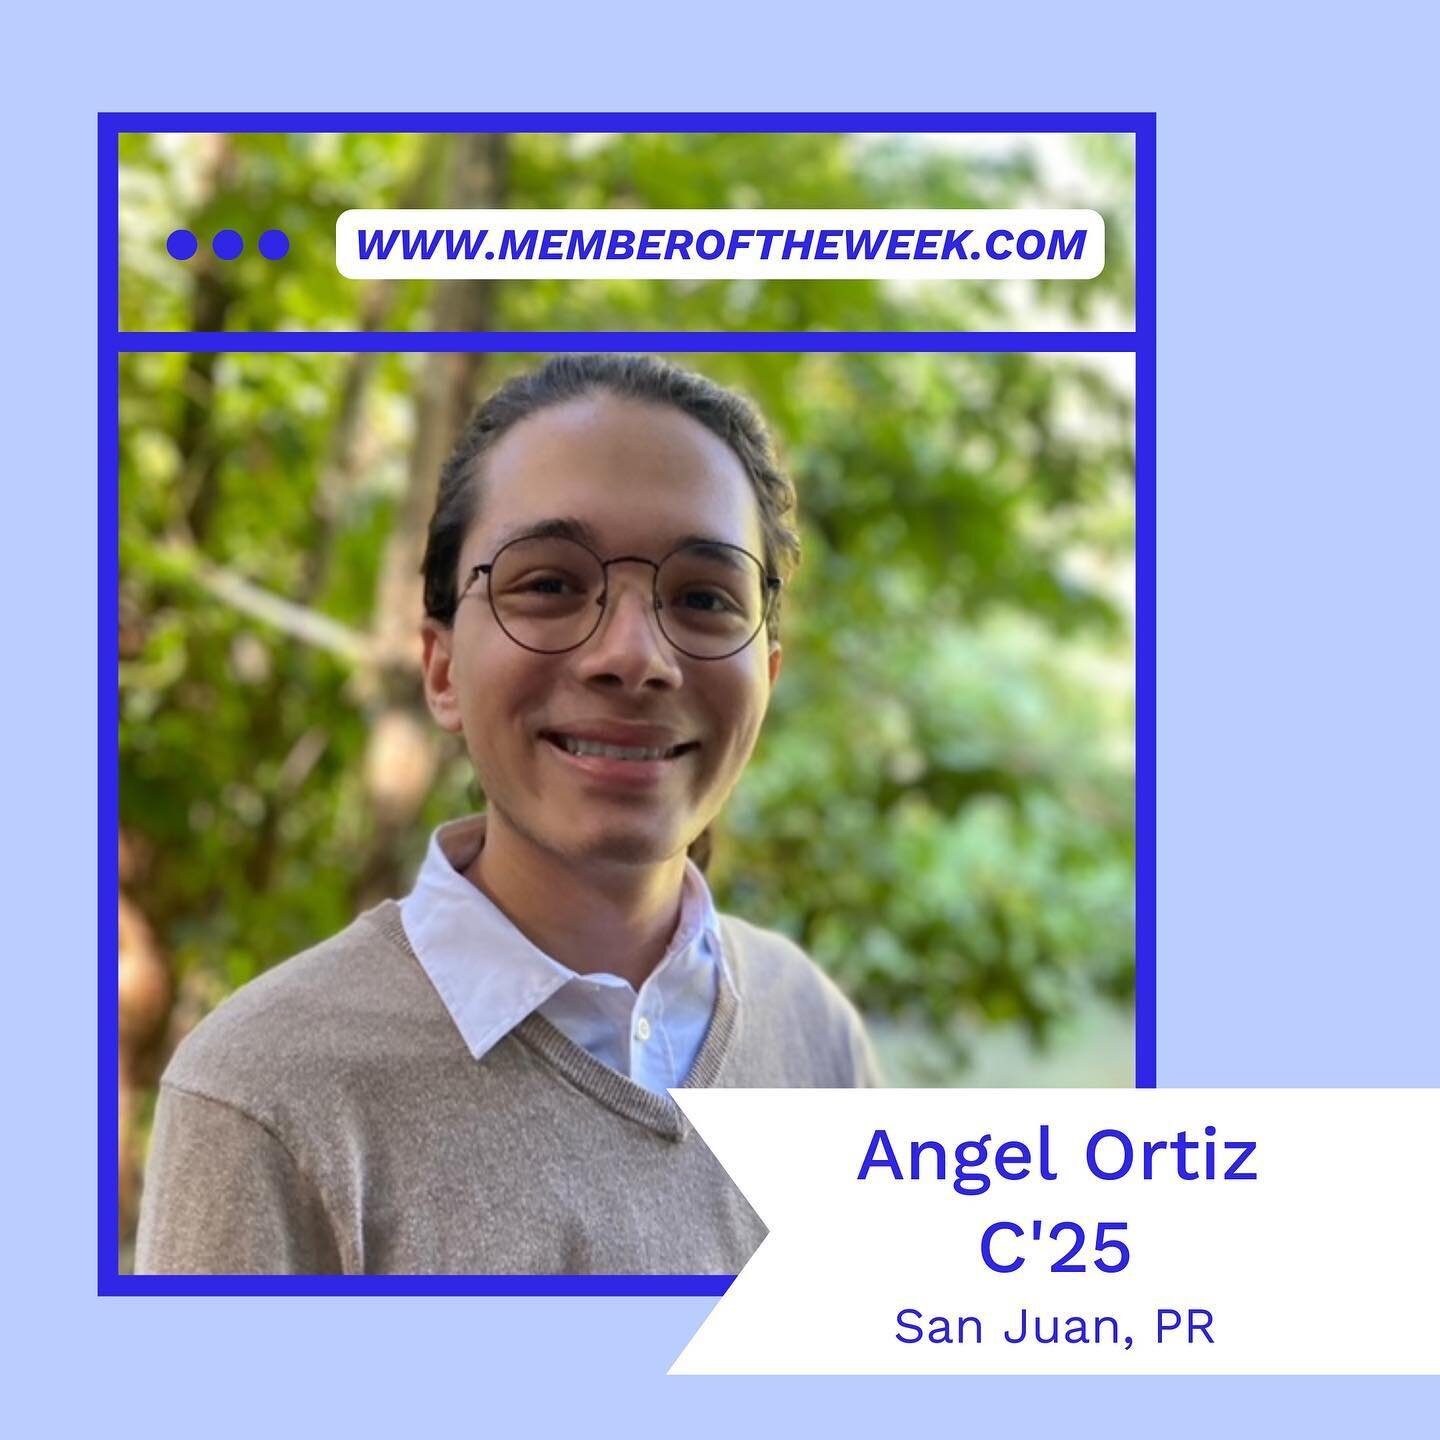 GIVE IT UP FOR THIS WEEKS MEMBER OF THE WEEK, ANGEL!!! 🥳🥳 Swipe to learn more about one of our awesome members!